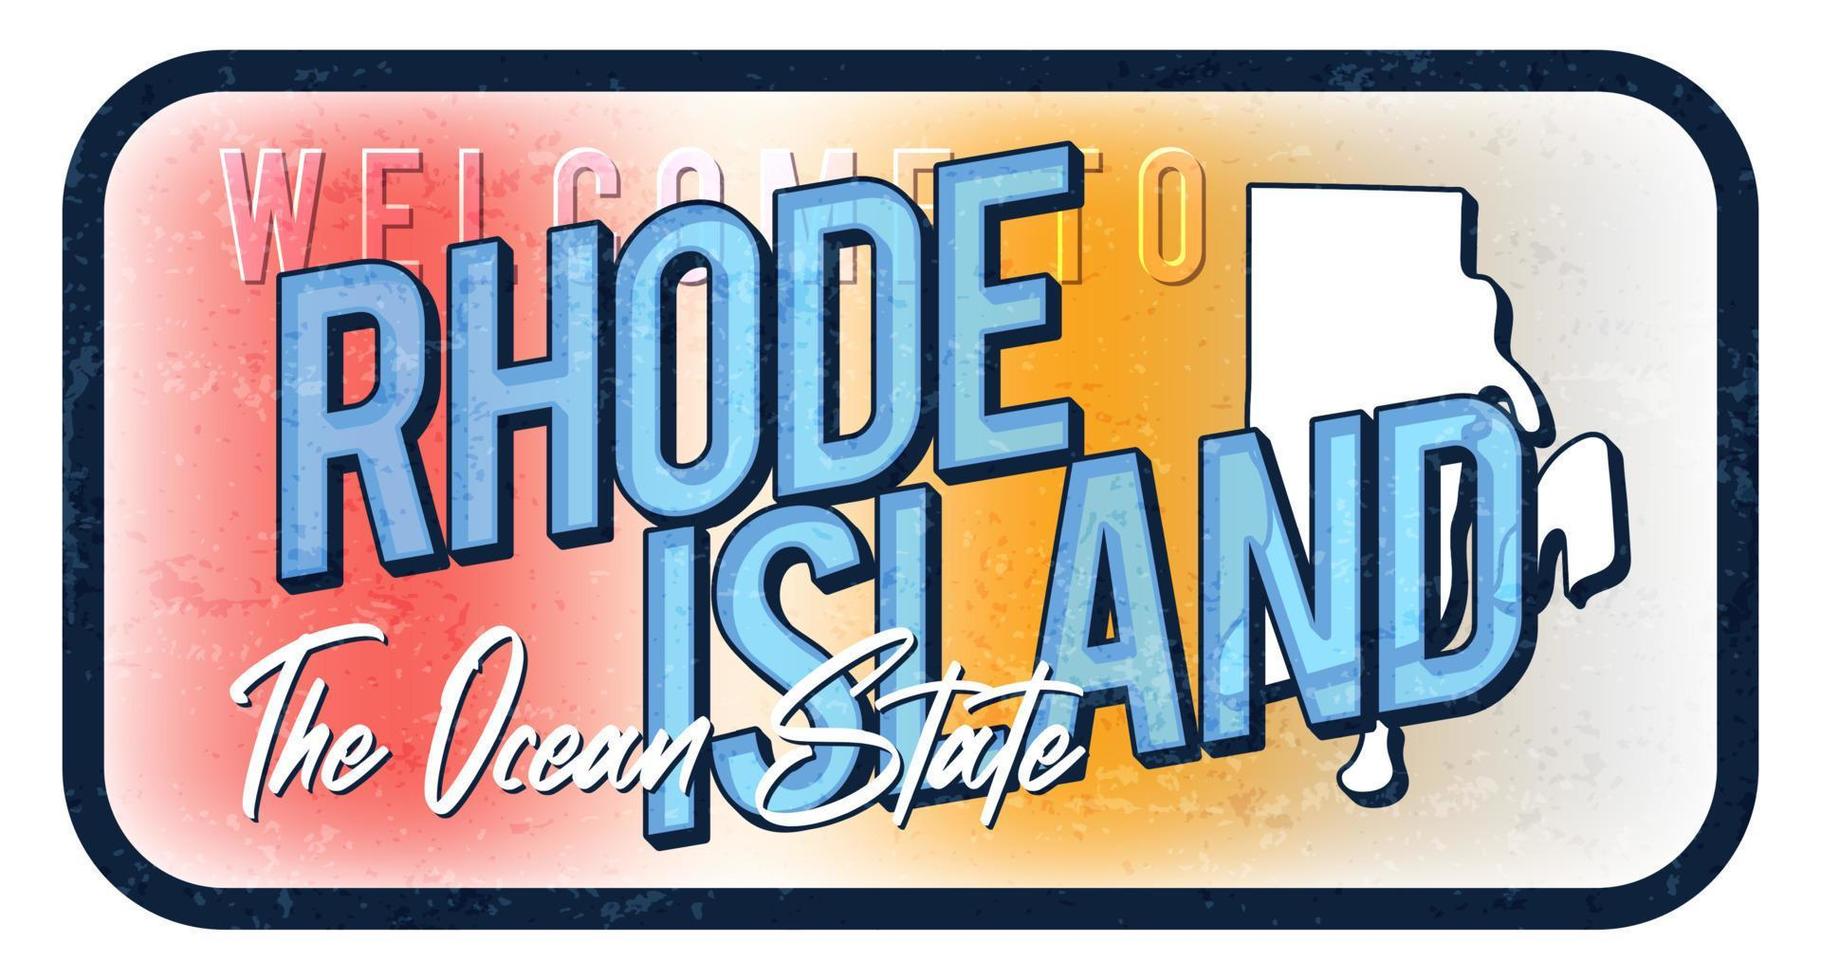 Welcome to rhode island vintage rusty metal sign vector illustration. Vector state map in grunge style with Typography hand drawn lettering.